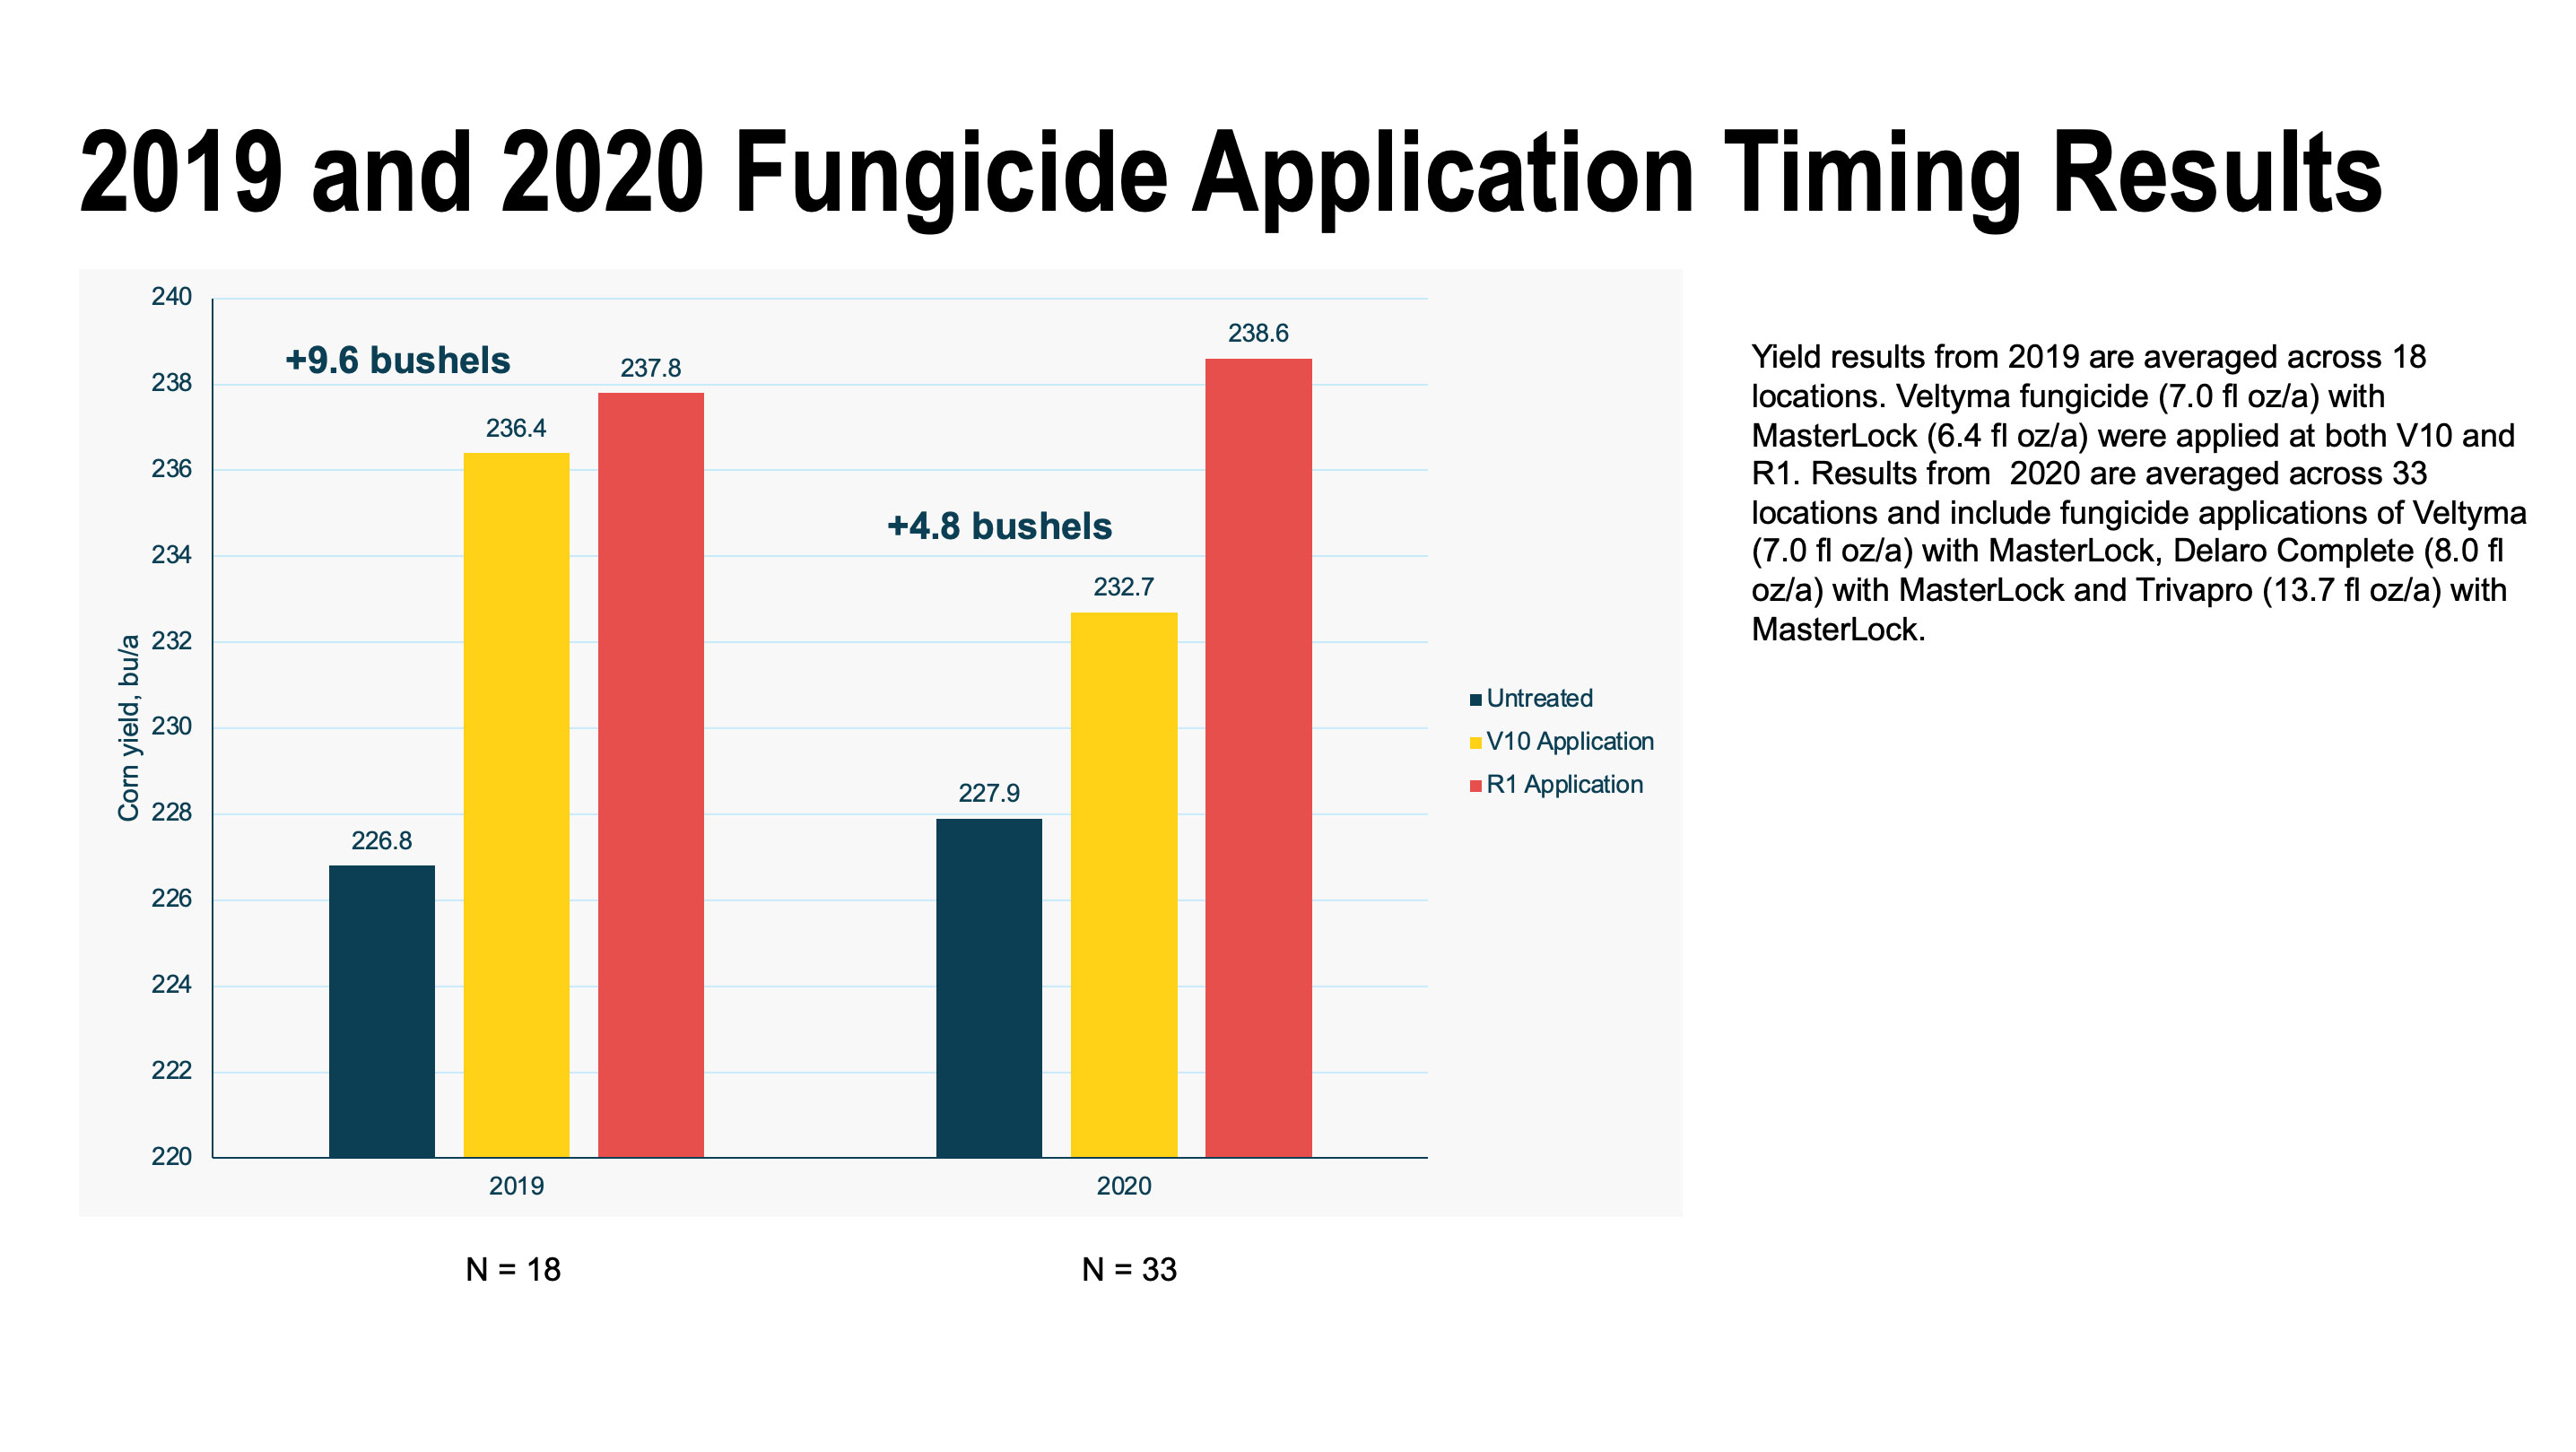 Graph showing 2019 and 2020 Fungicide Application Timing Results